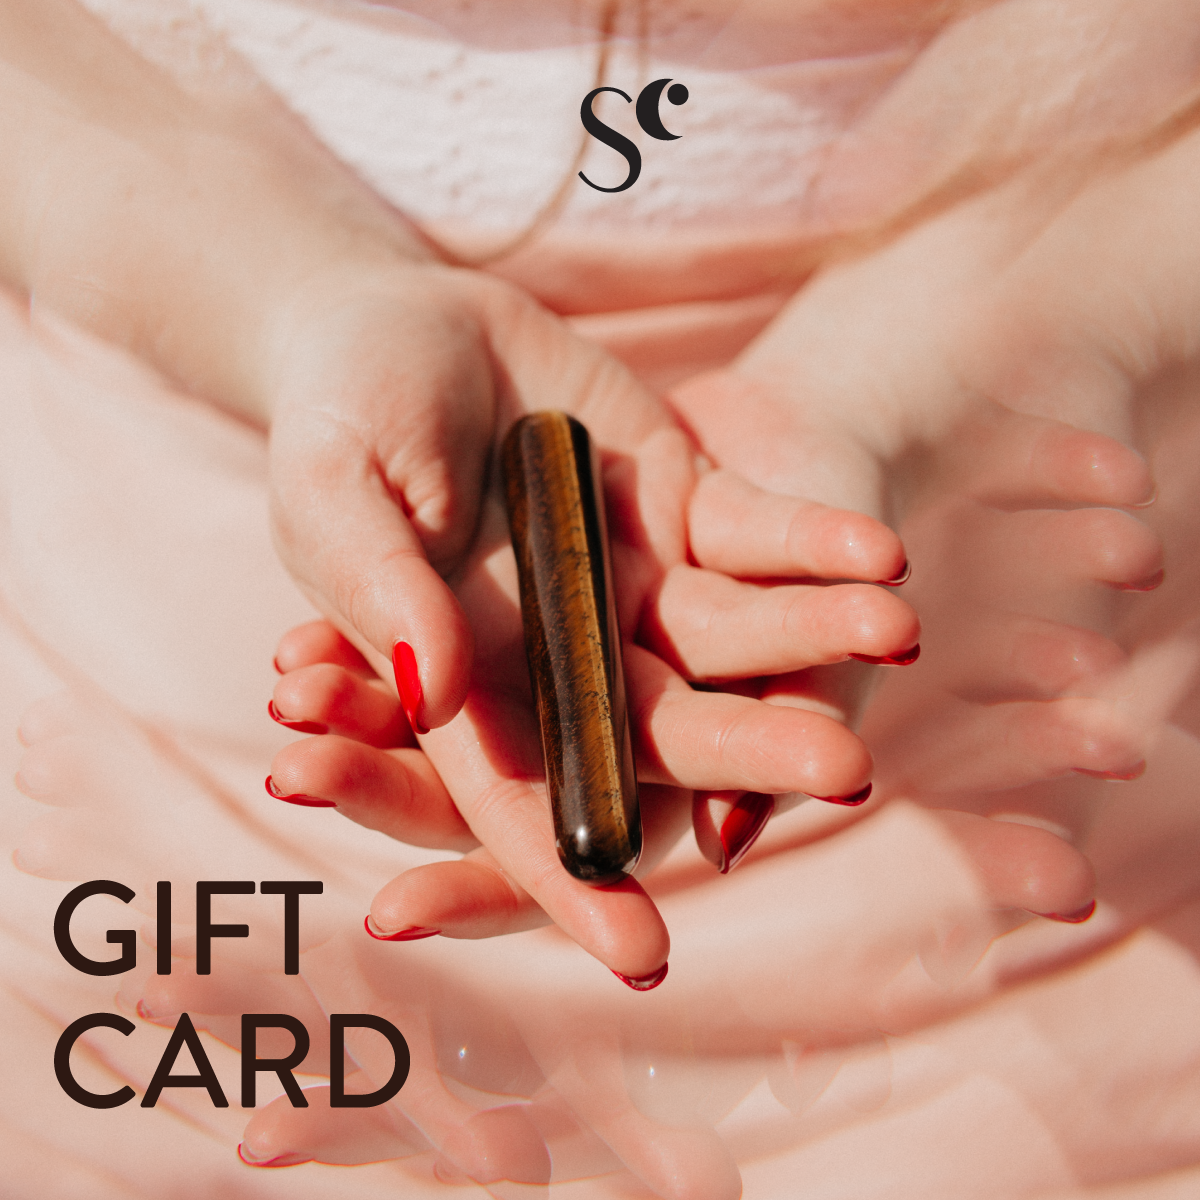 Gift Cards - The Feminist Shop